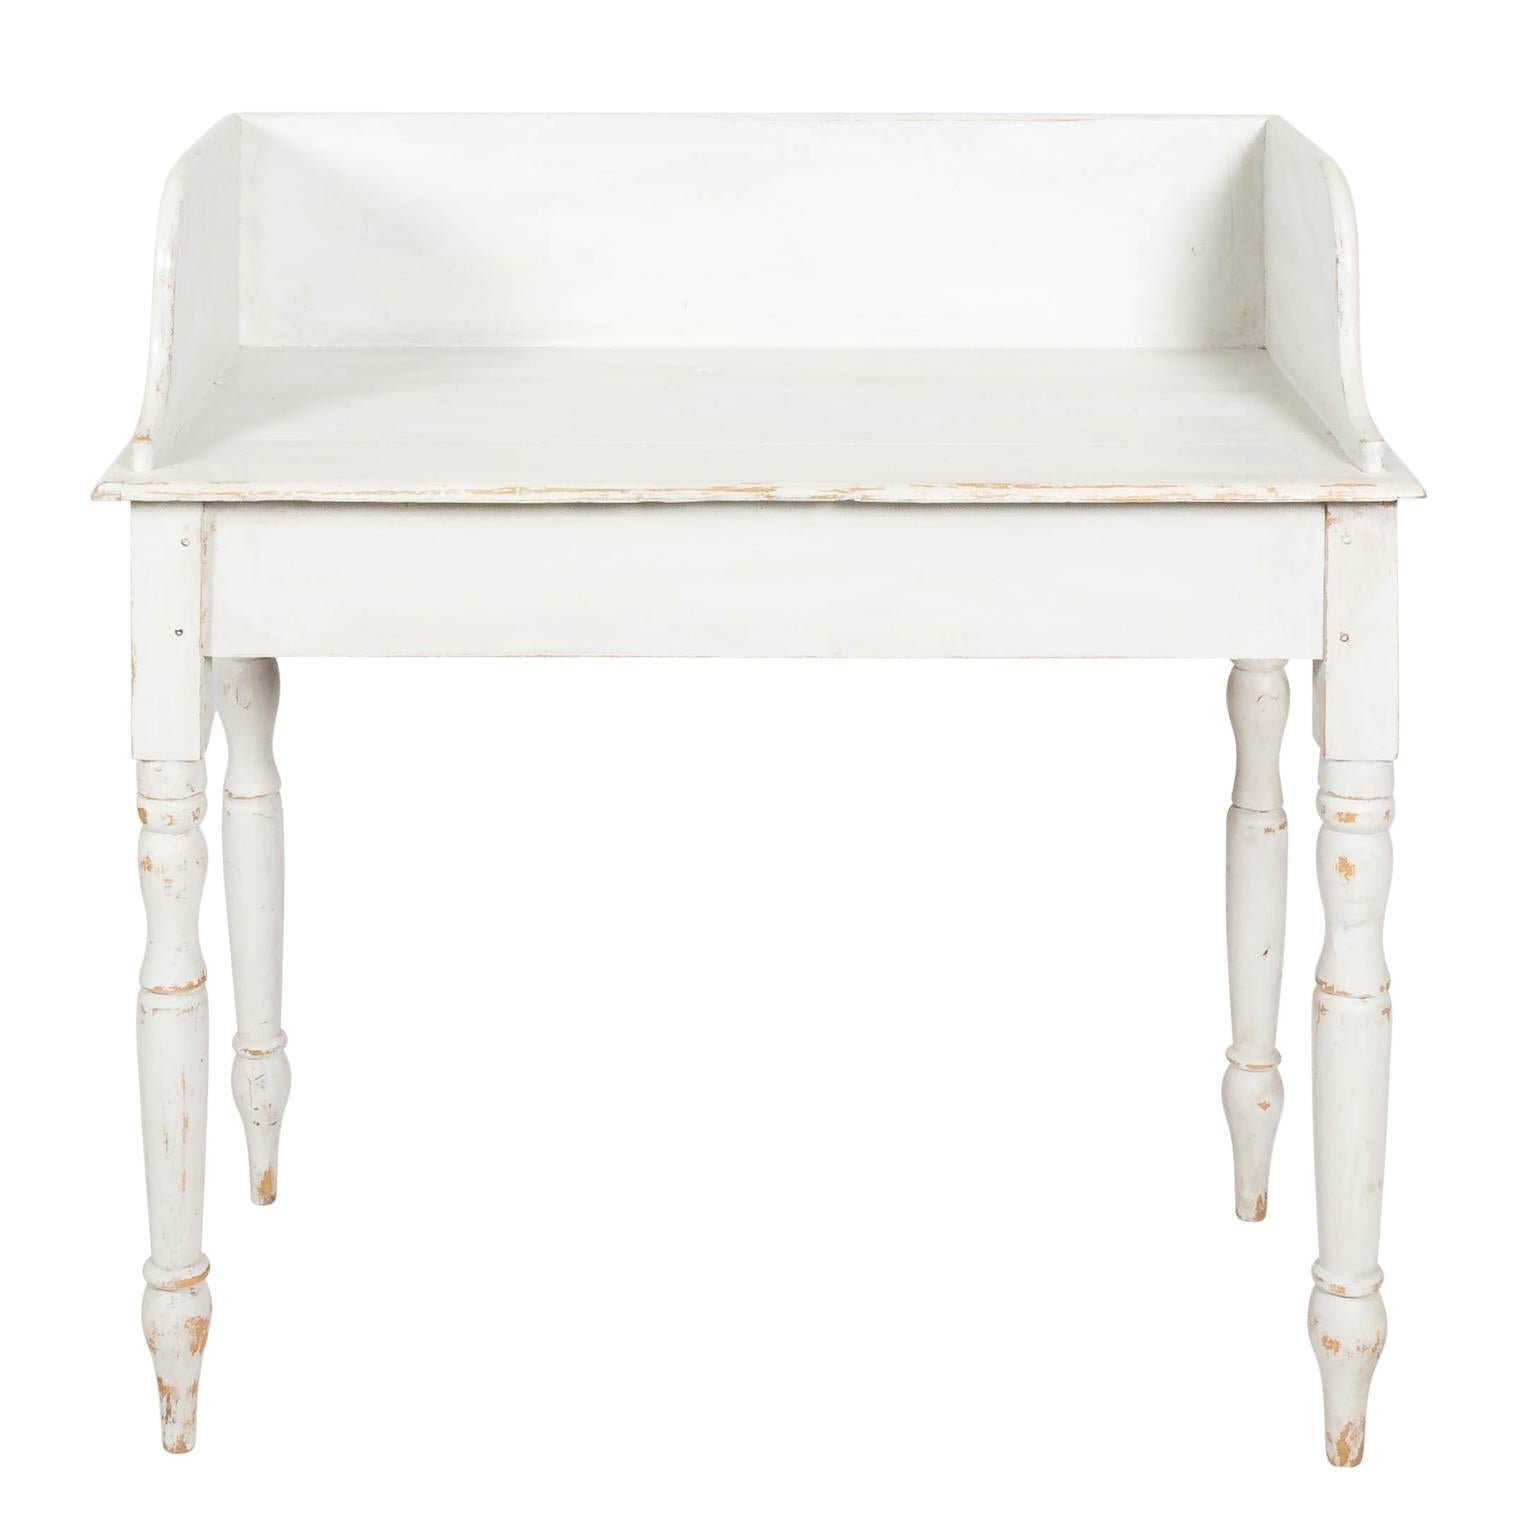 American white painted pinewood washstand with a curved gallery, ring turned legs, and arrow feet, circa early 19th century.